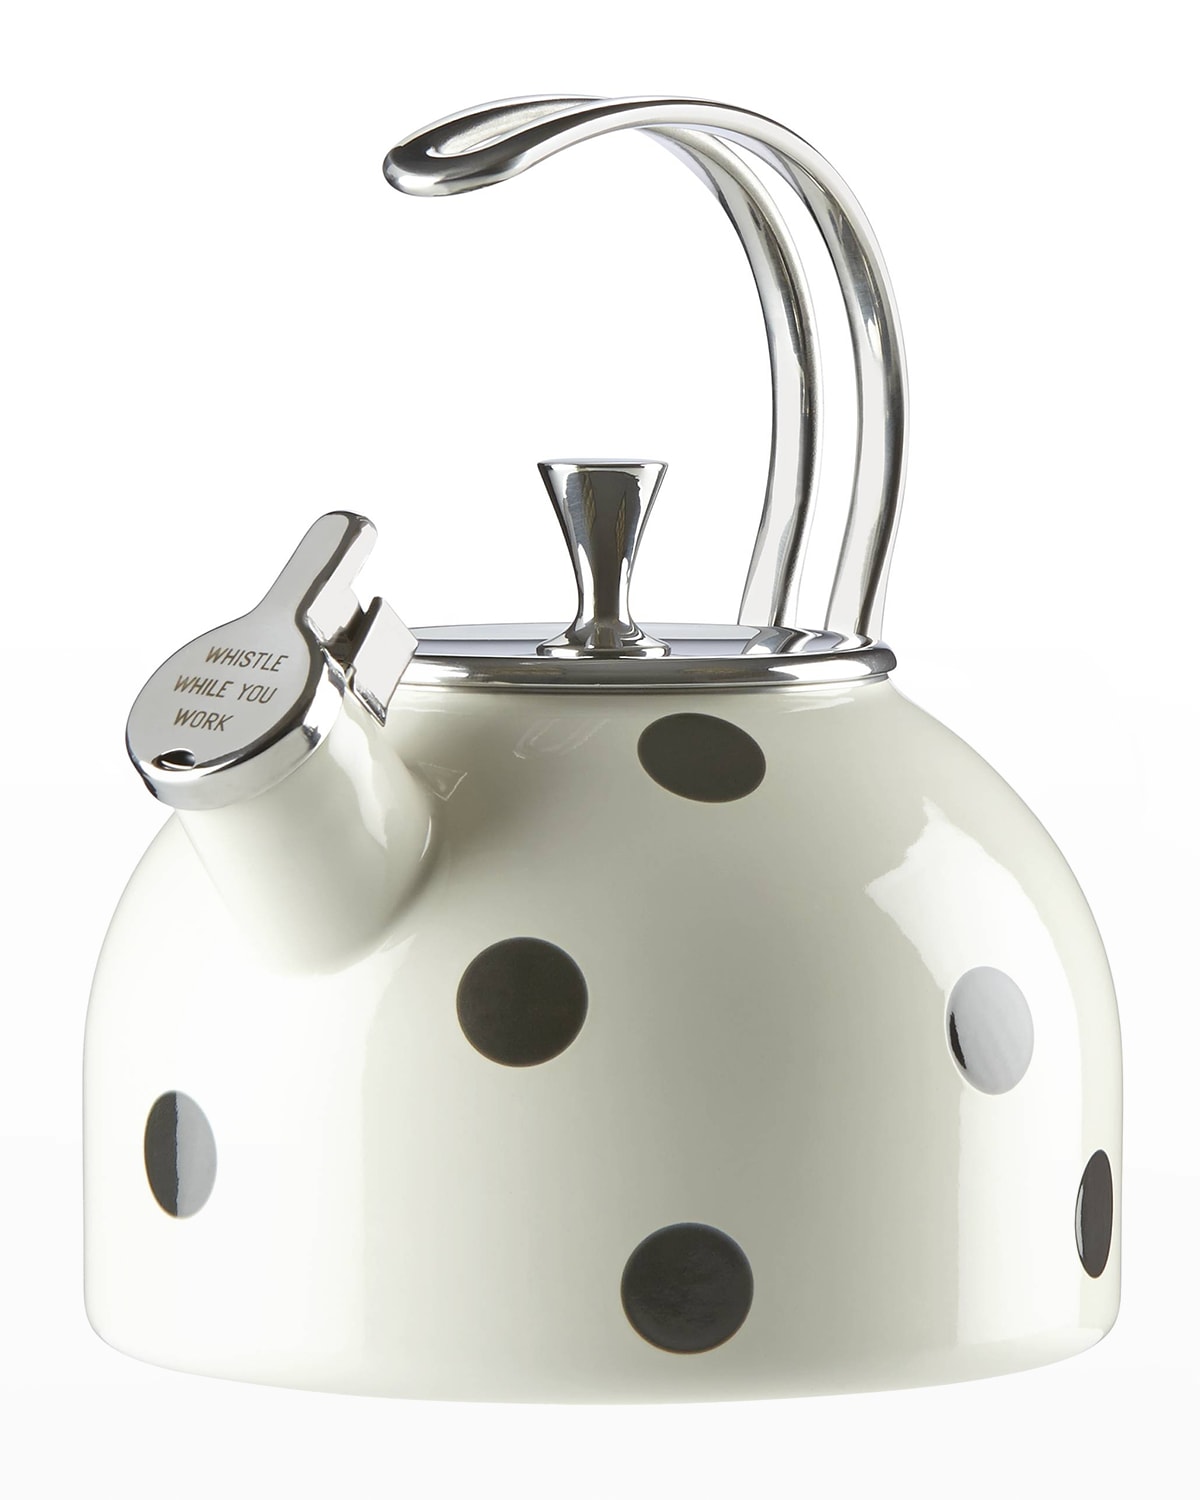 Kate Spade Whistle While You Work Enamel Teakettle In Scatter Dot